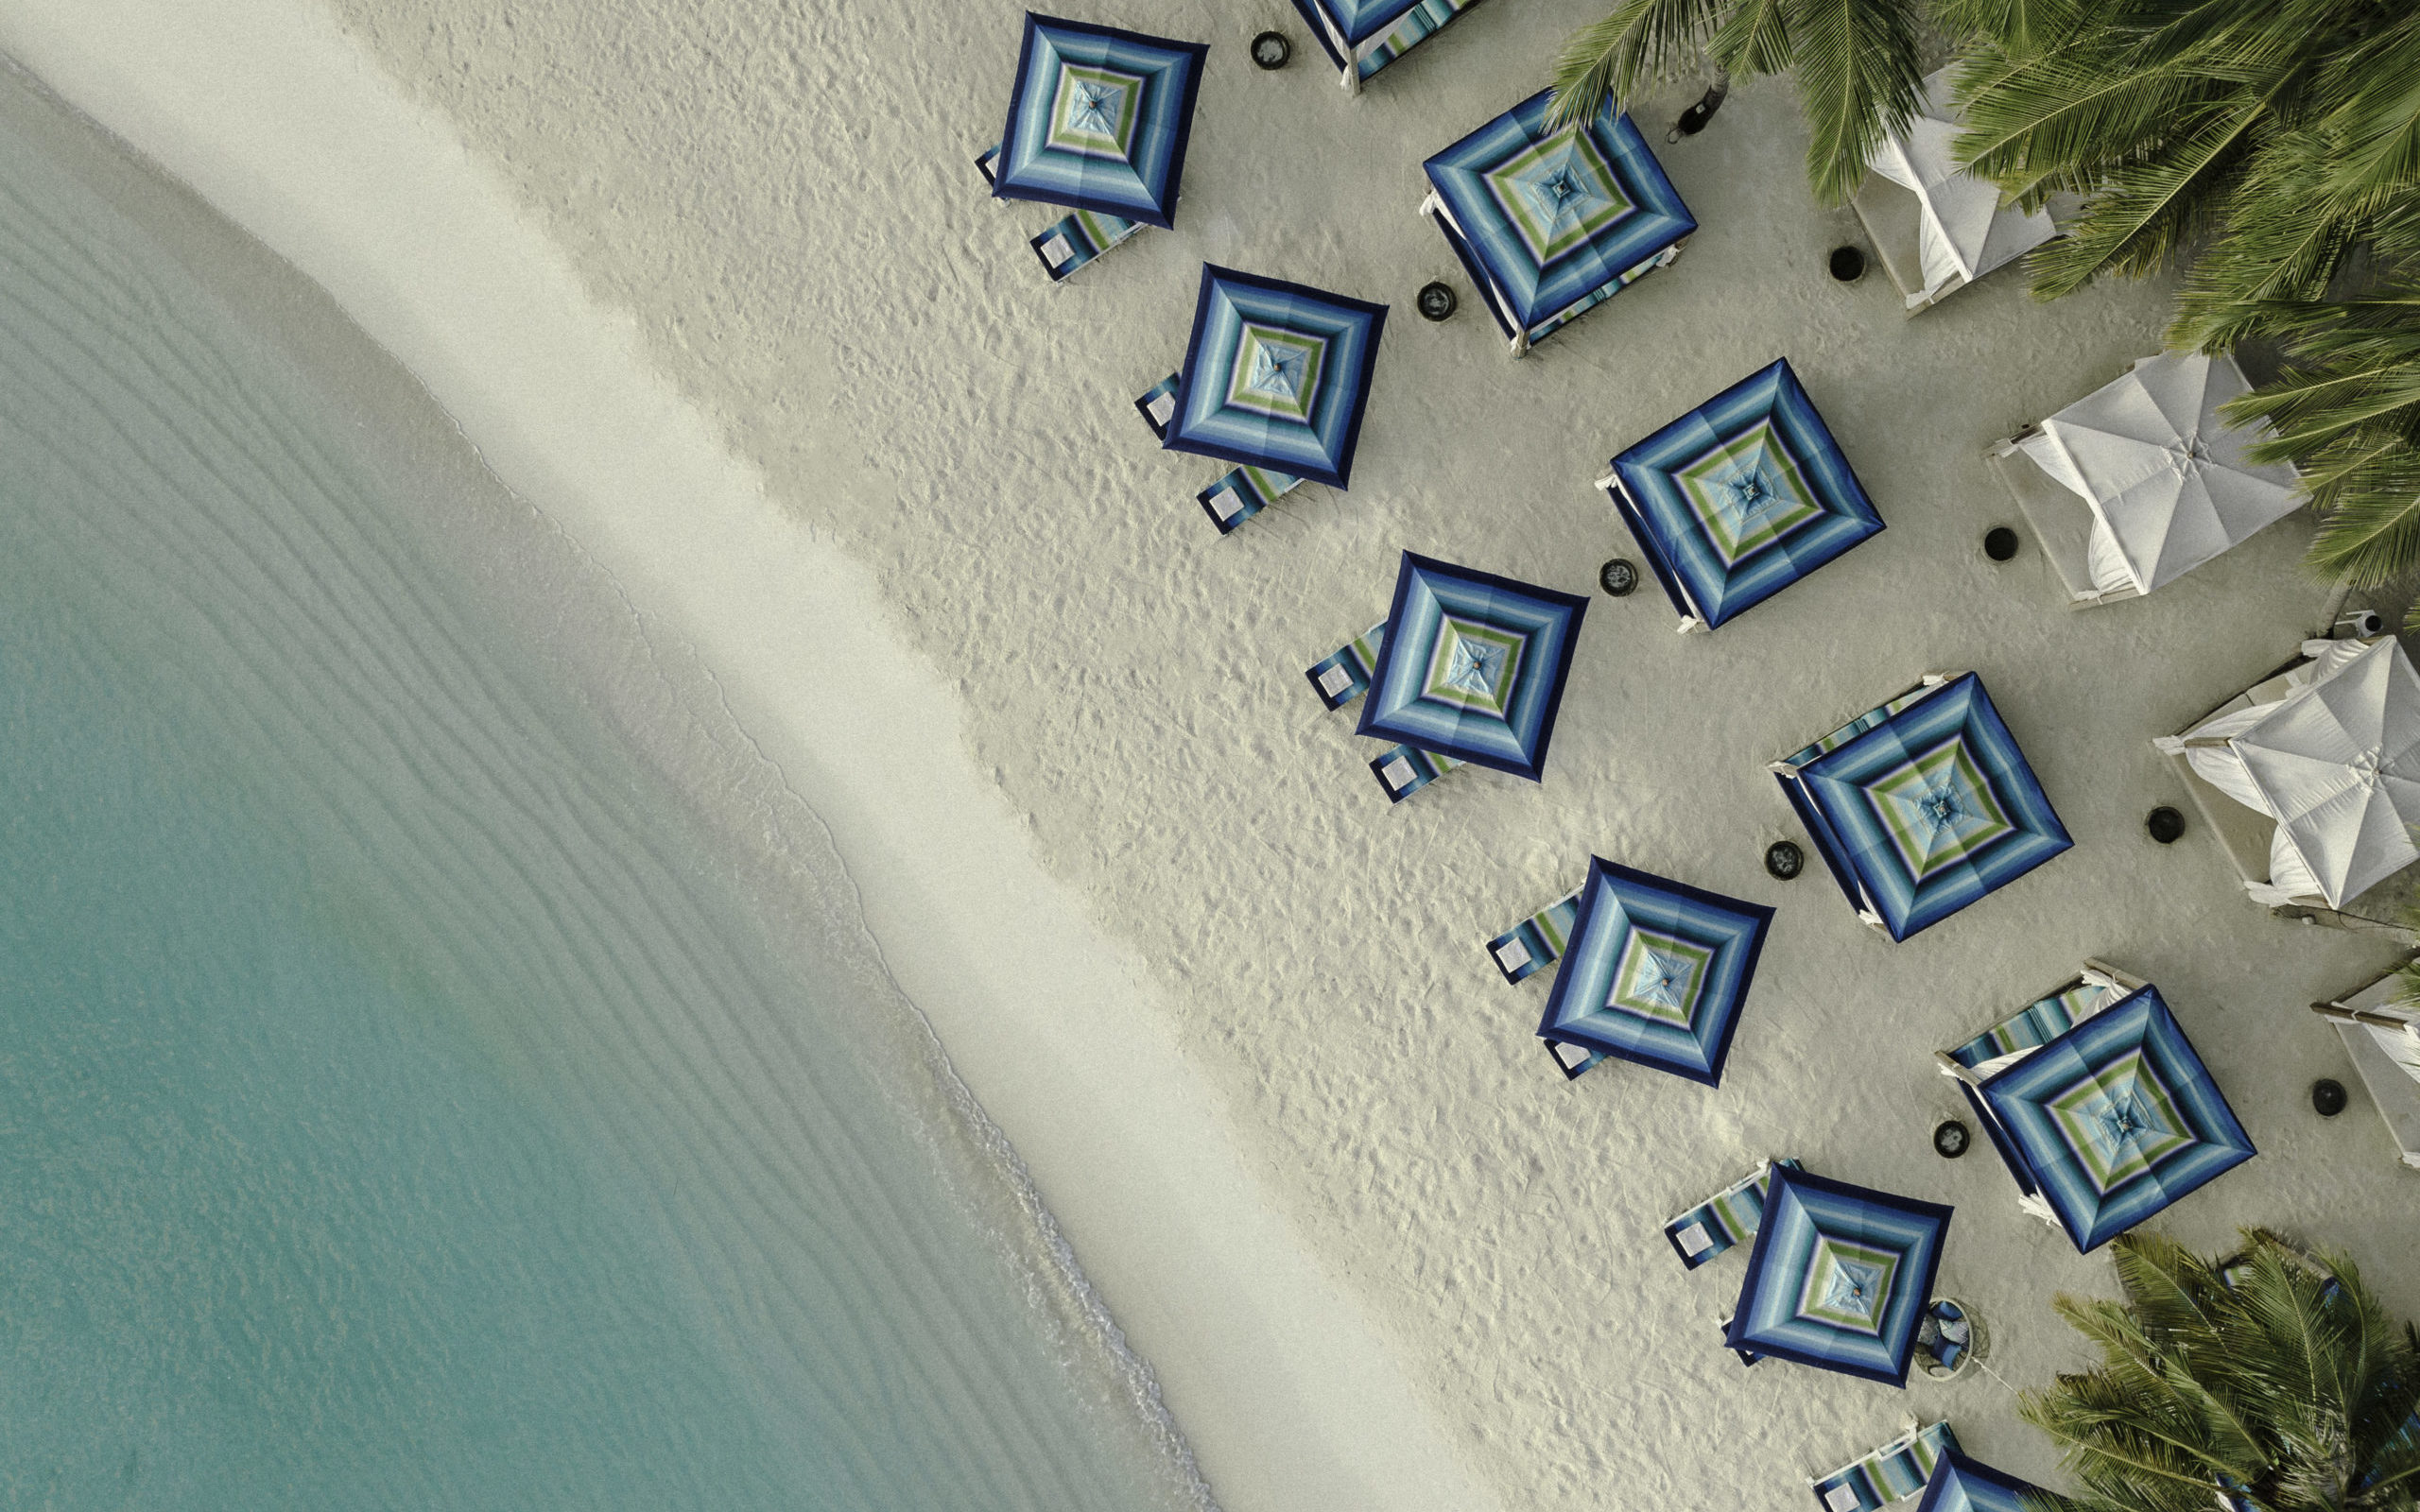 One&Only Maldives’ Resort Collaborates with Italian Fashion House Missoni to Create the Ultimate Beach Paradise